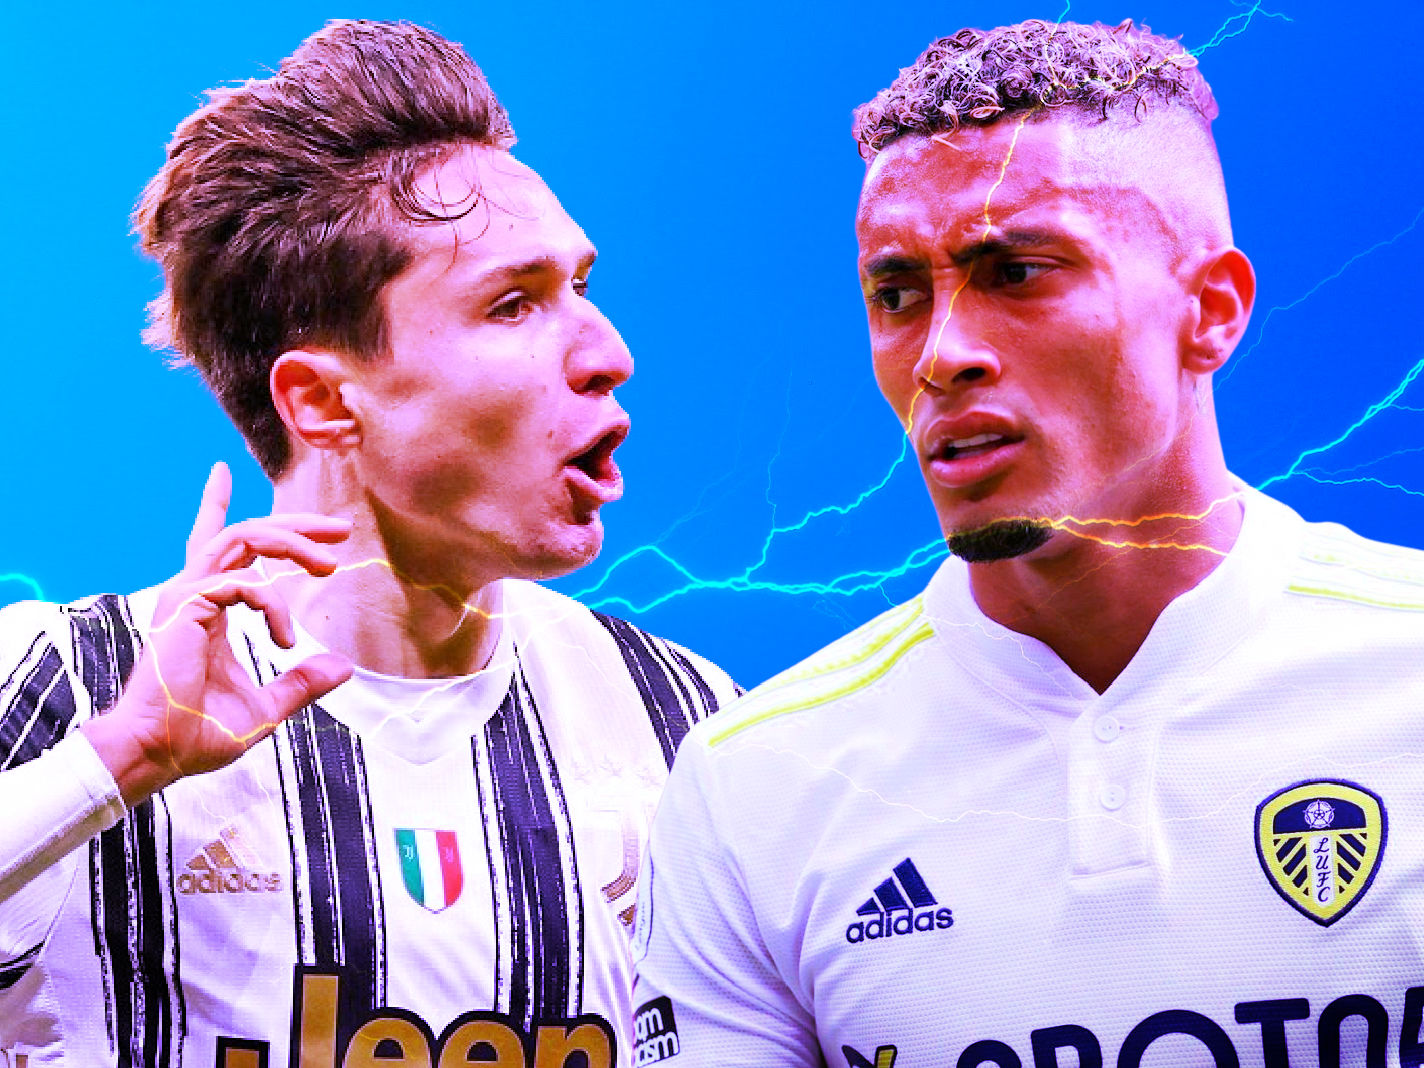 Federico Chiesa and Raphinha are one of the most fiery right-wingers in football currently